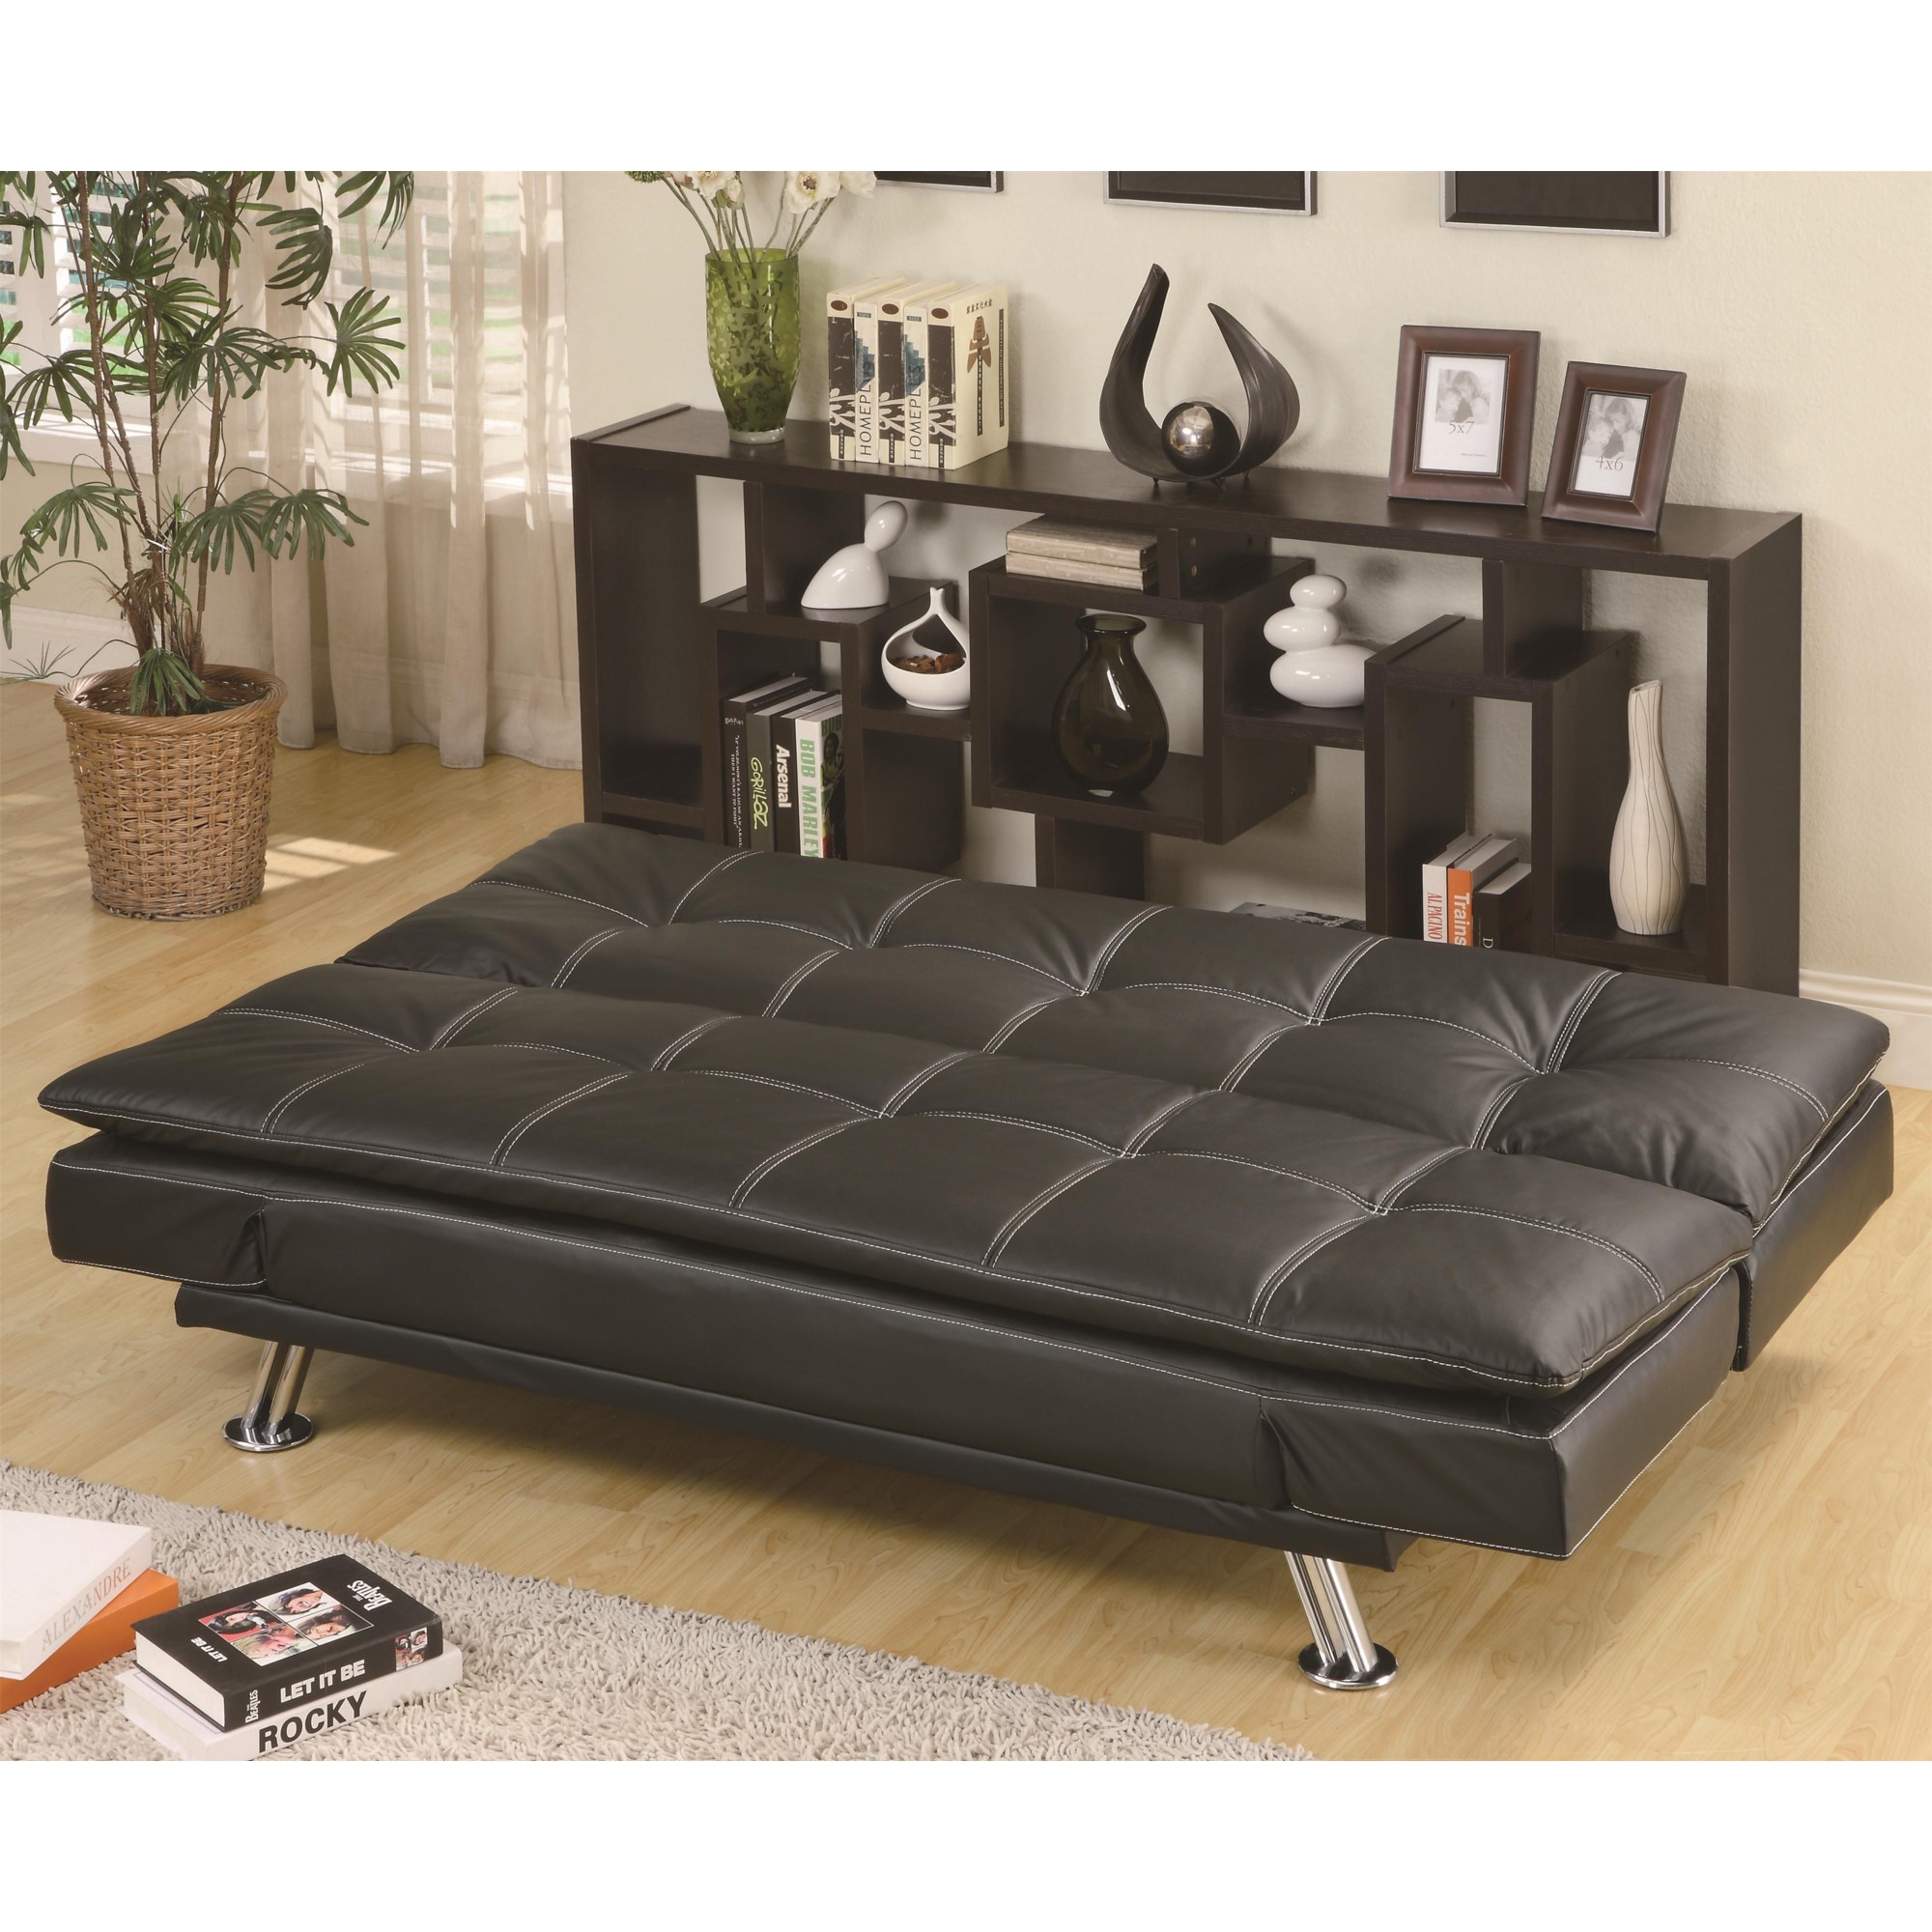 Coaster Sofa Beds and Futons 300281 Contemporary Styled Futon Sleeper Sofa  Bed, Nassau Furniture and Mattress